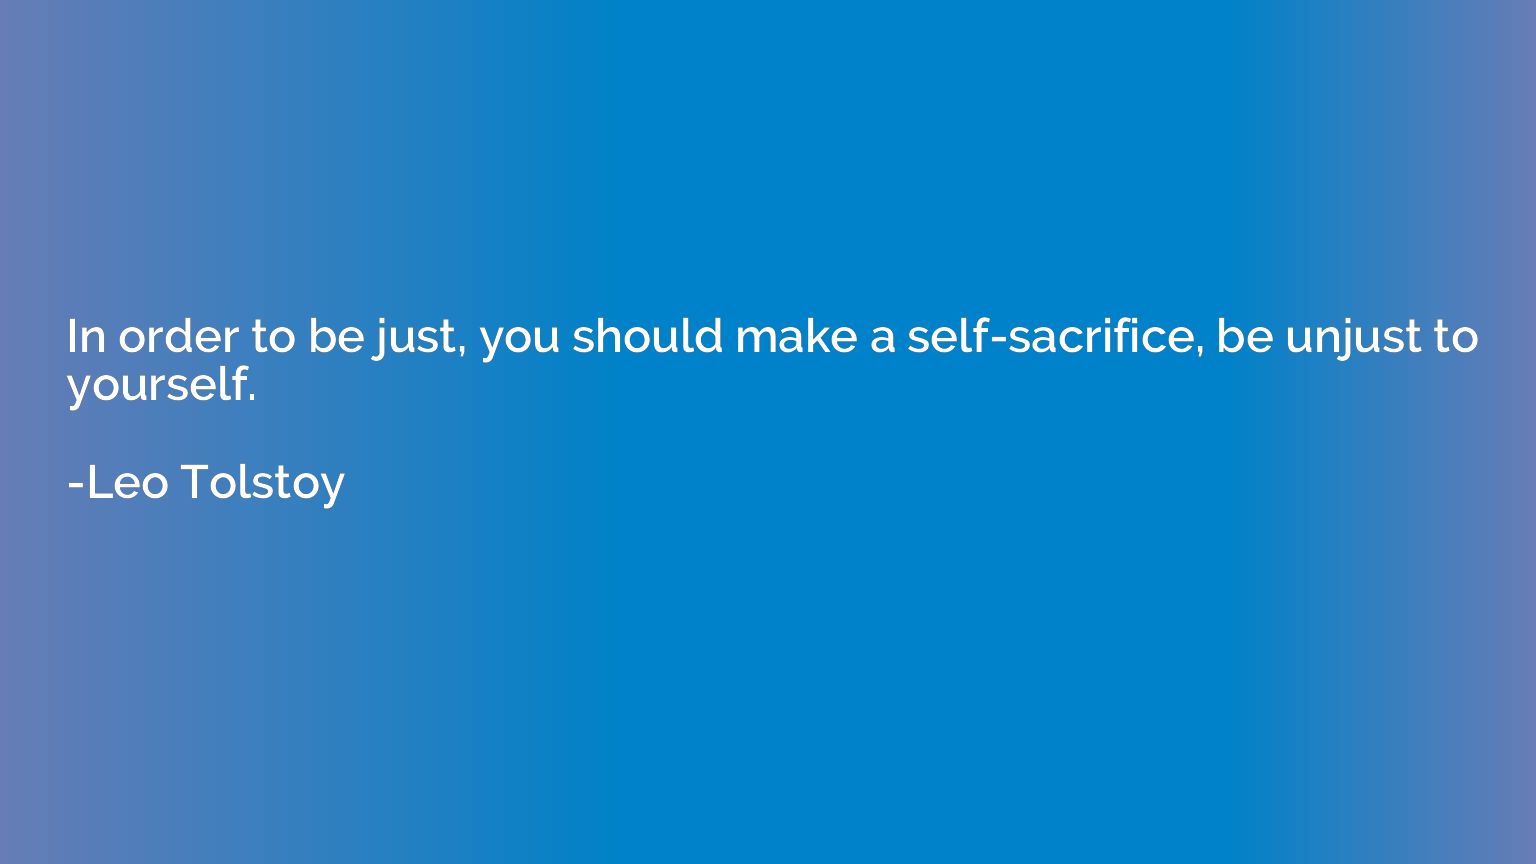 In order to be just, you should make a self-sacrifice, be un